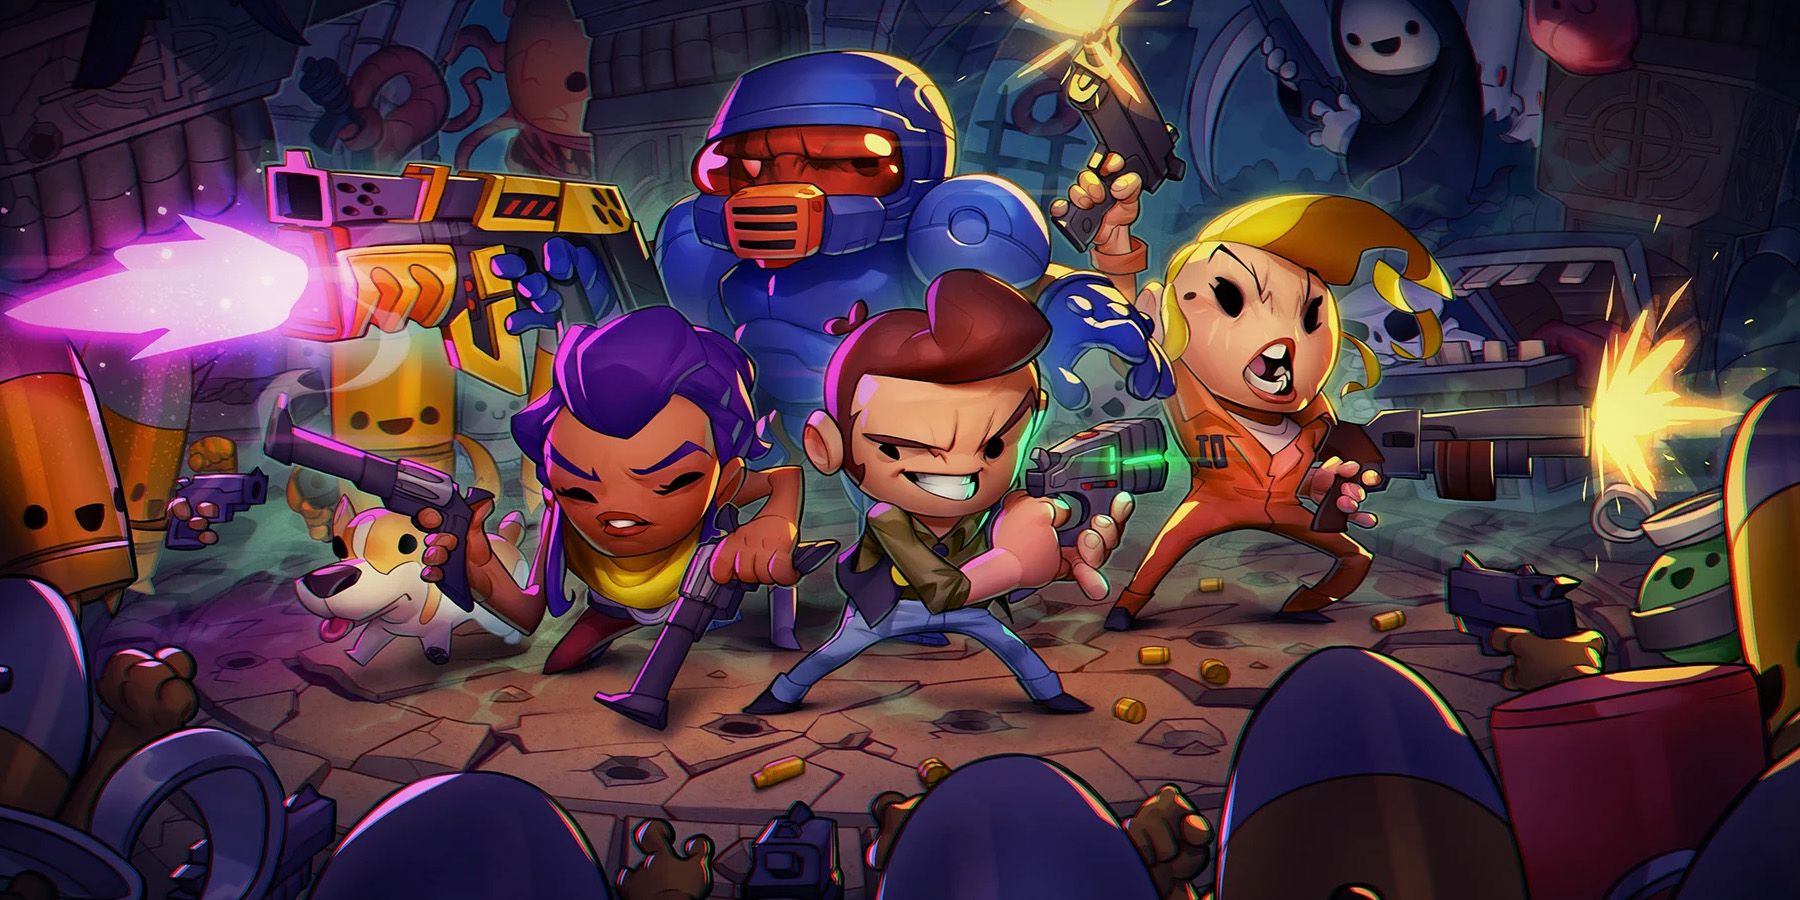 An image of characters from Enter the Gungeon